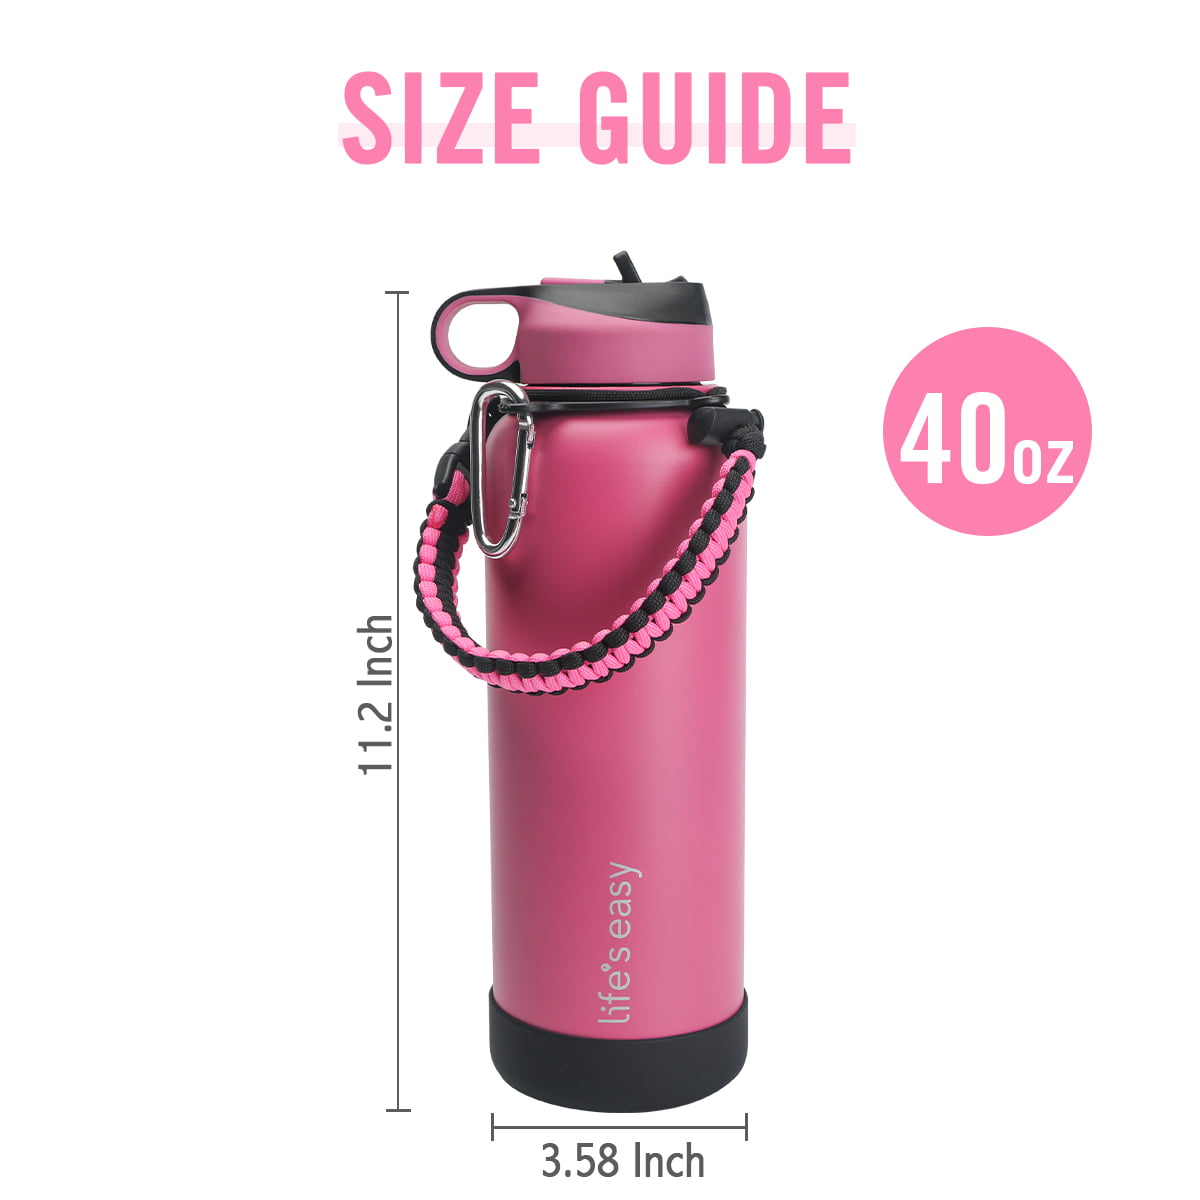 Daisy Macrame Handle for Hydro Flask 1.0，Iron Flask Wide Mouth Water  Bottles (12 to 40oz), Carabiner Carrier Accessories, Plus a Protective  Silicone